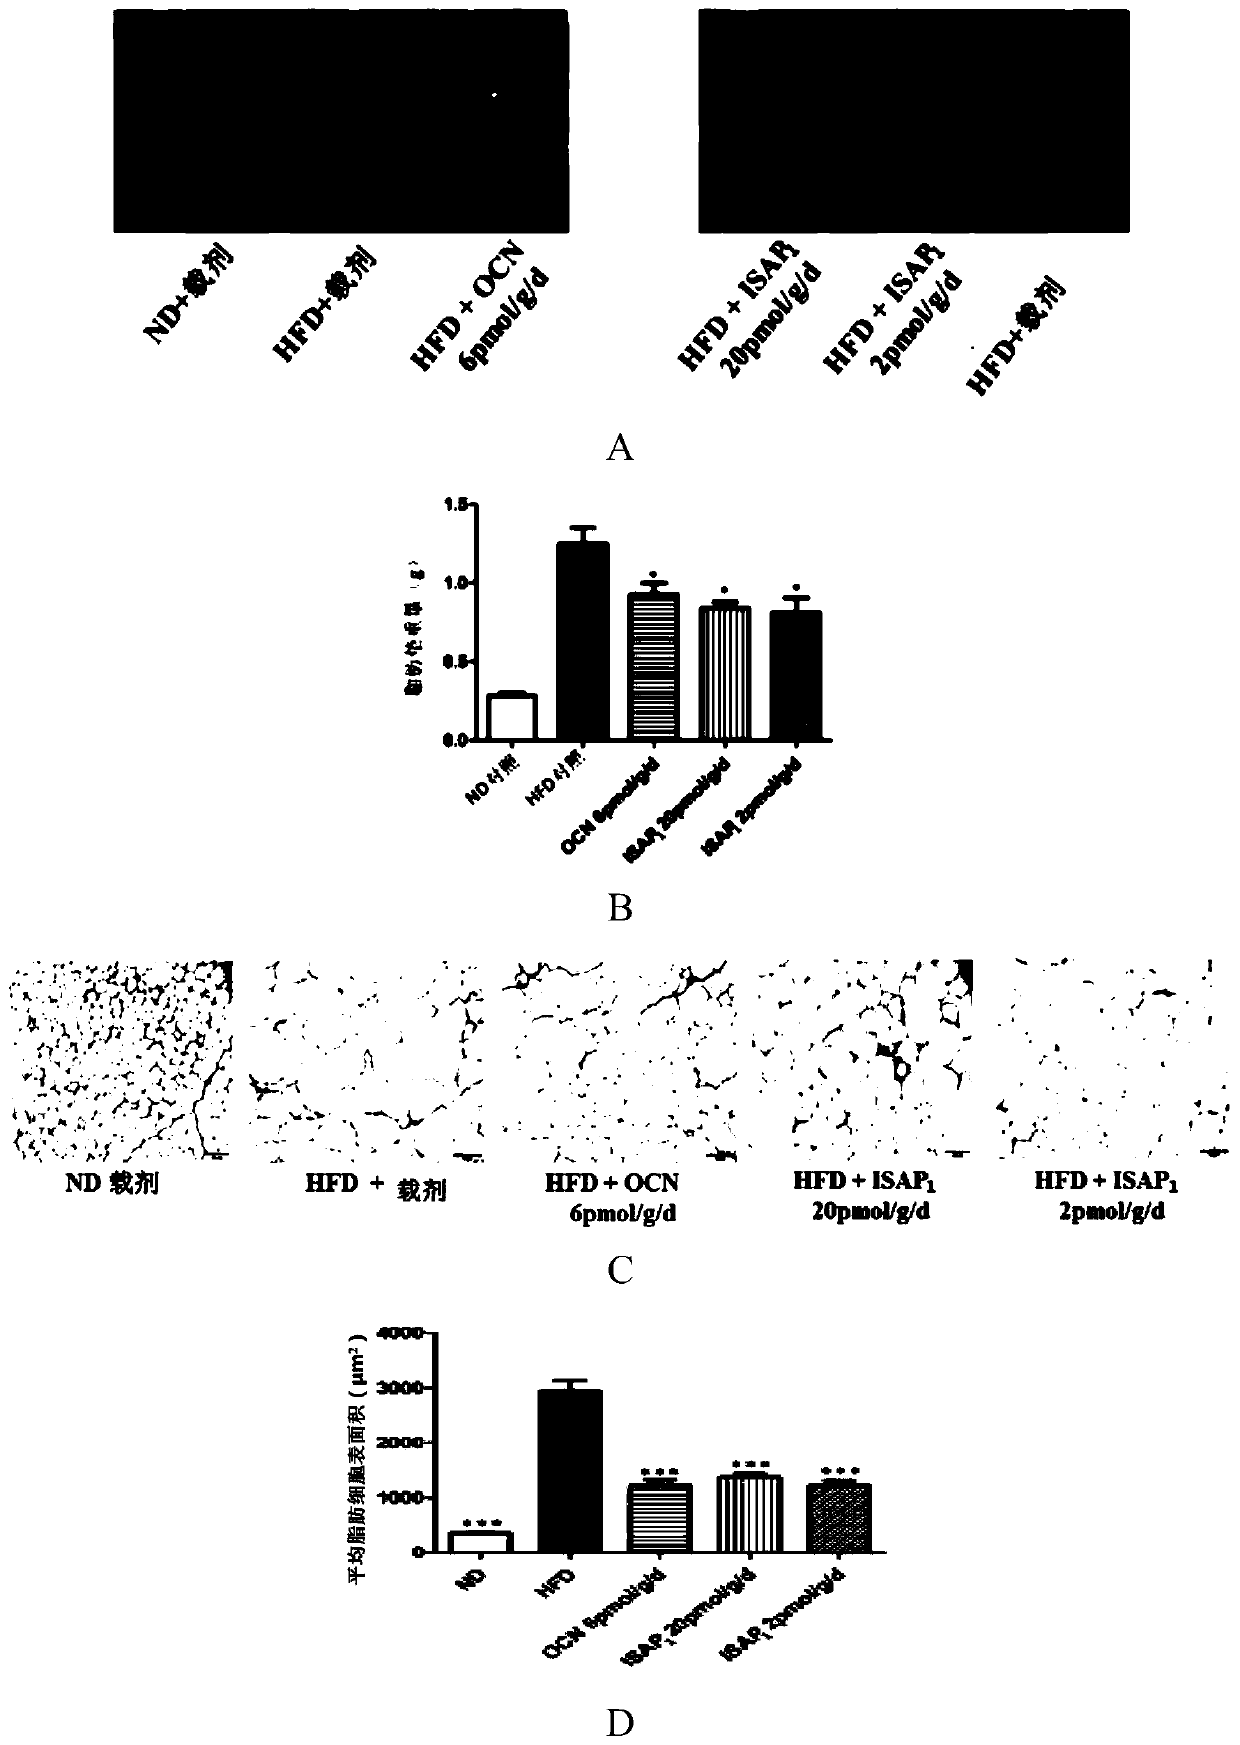 Polypeptides regulating energy metabolism and uses thereof